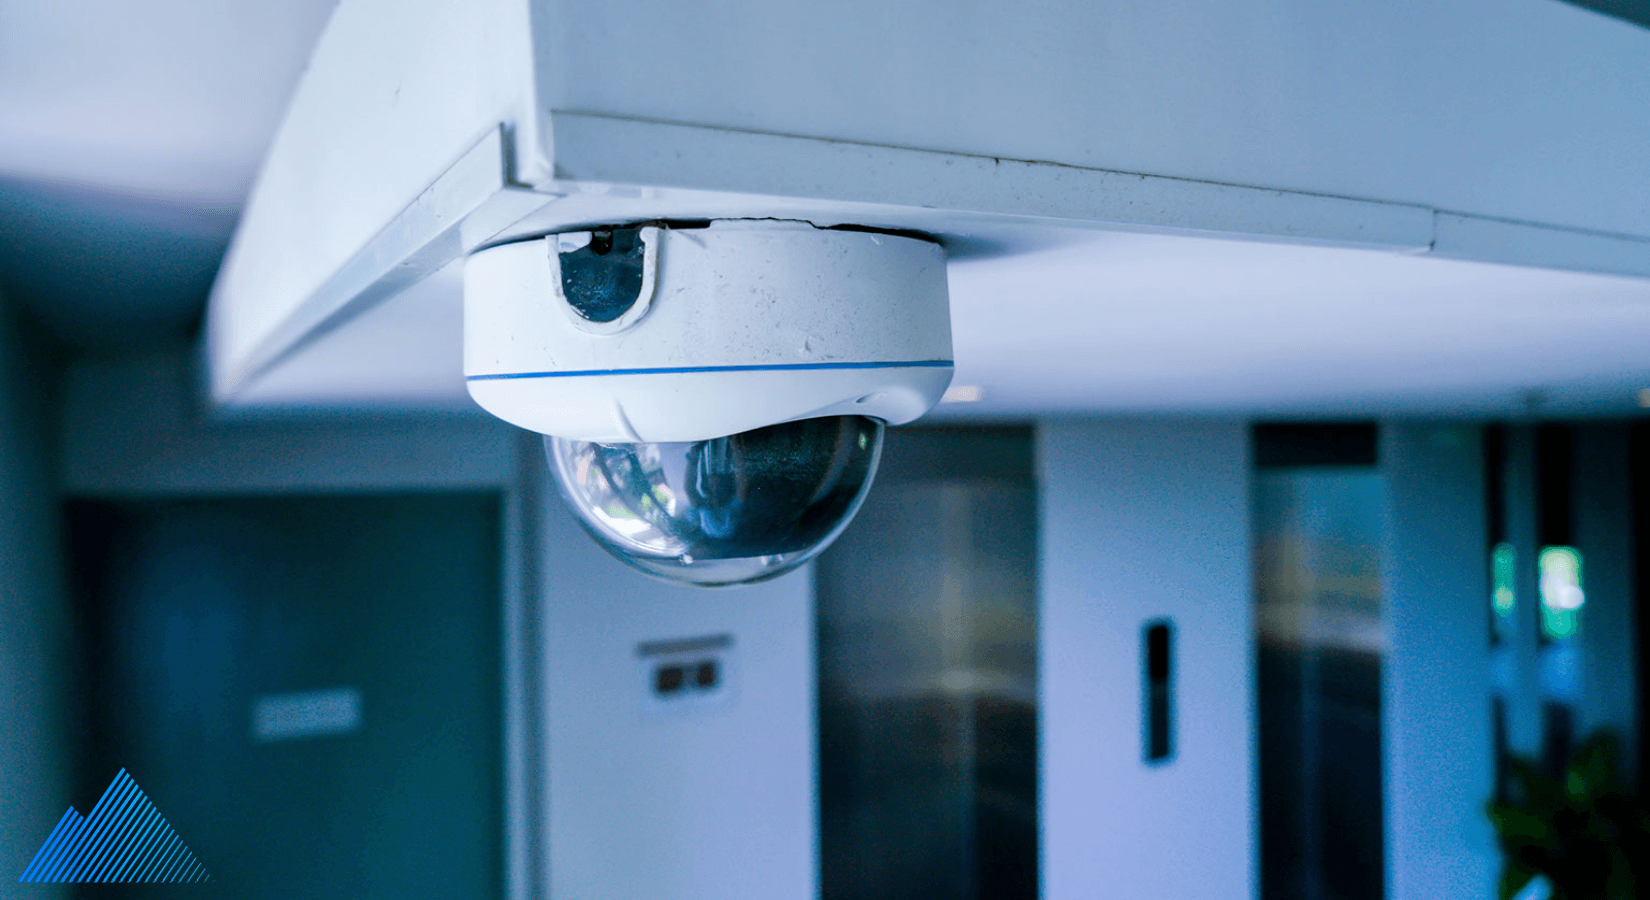 Dome camera mounted on an office cieling